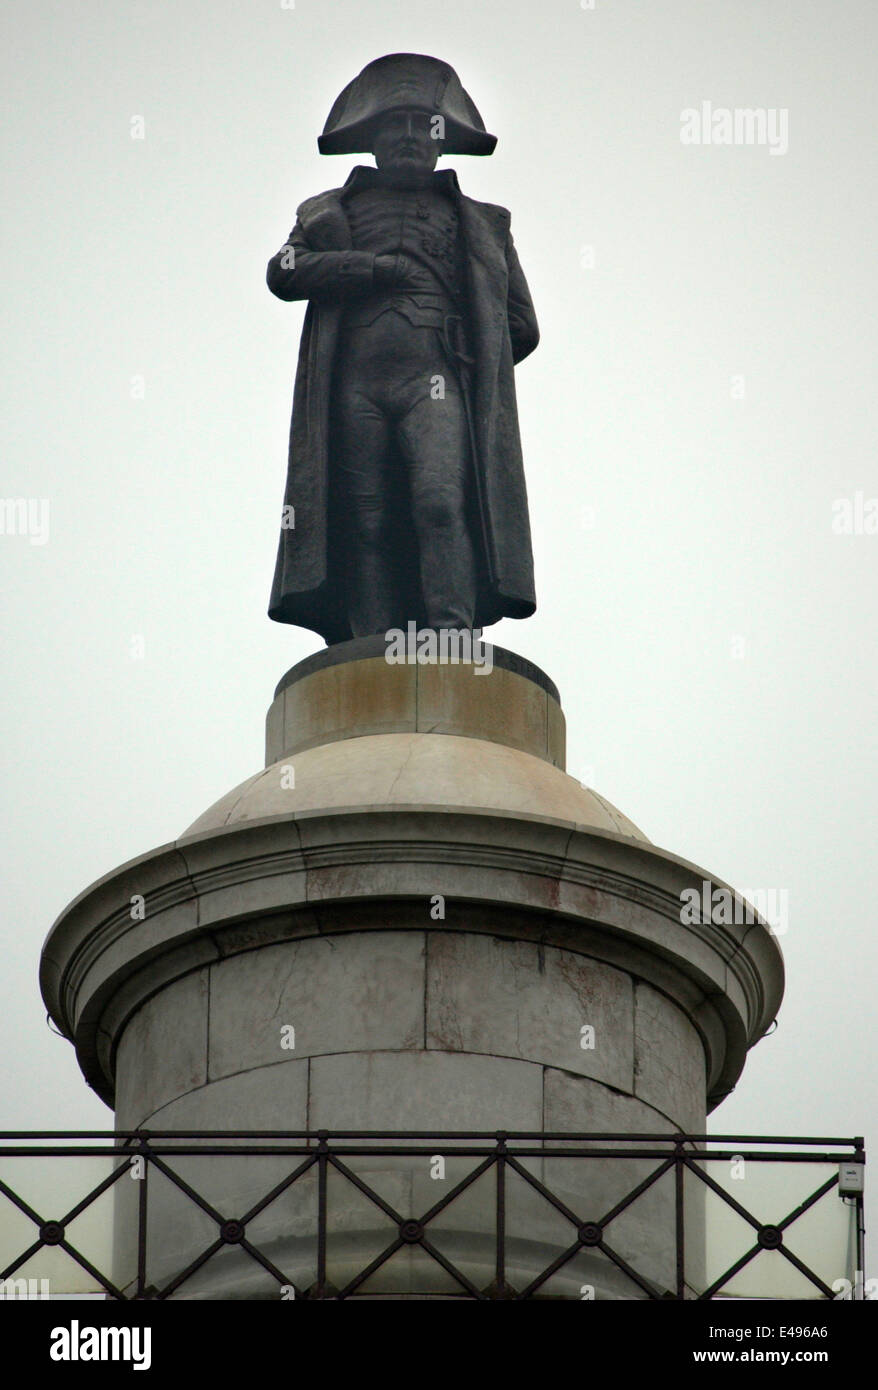 AJAXNETPHOTO. 2005.  WIMEREAUX,FRANCE - BOULOGNE-WIMEREAUX-ST.MARTIN - STATUE OF NAPOLEON BONAPARTE ON TOP OF THE MEMORIAL COLONNE DE LA GRANDE ARMEE TO THE EAST OF BOULOGNE JUST OFF THE N1 FACING NORTH ACROSS THE ENGLISH CHANNEL.PHOTO:JONATHAN EASTLAND/AJAX Stock Photo